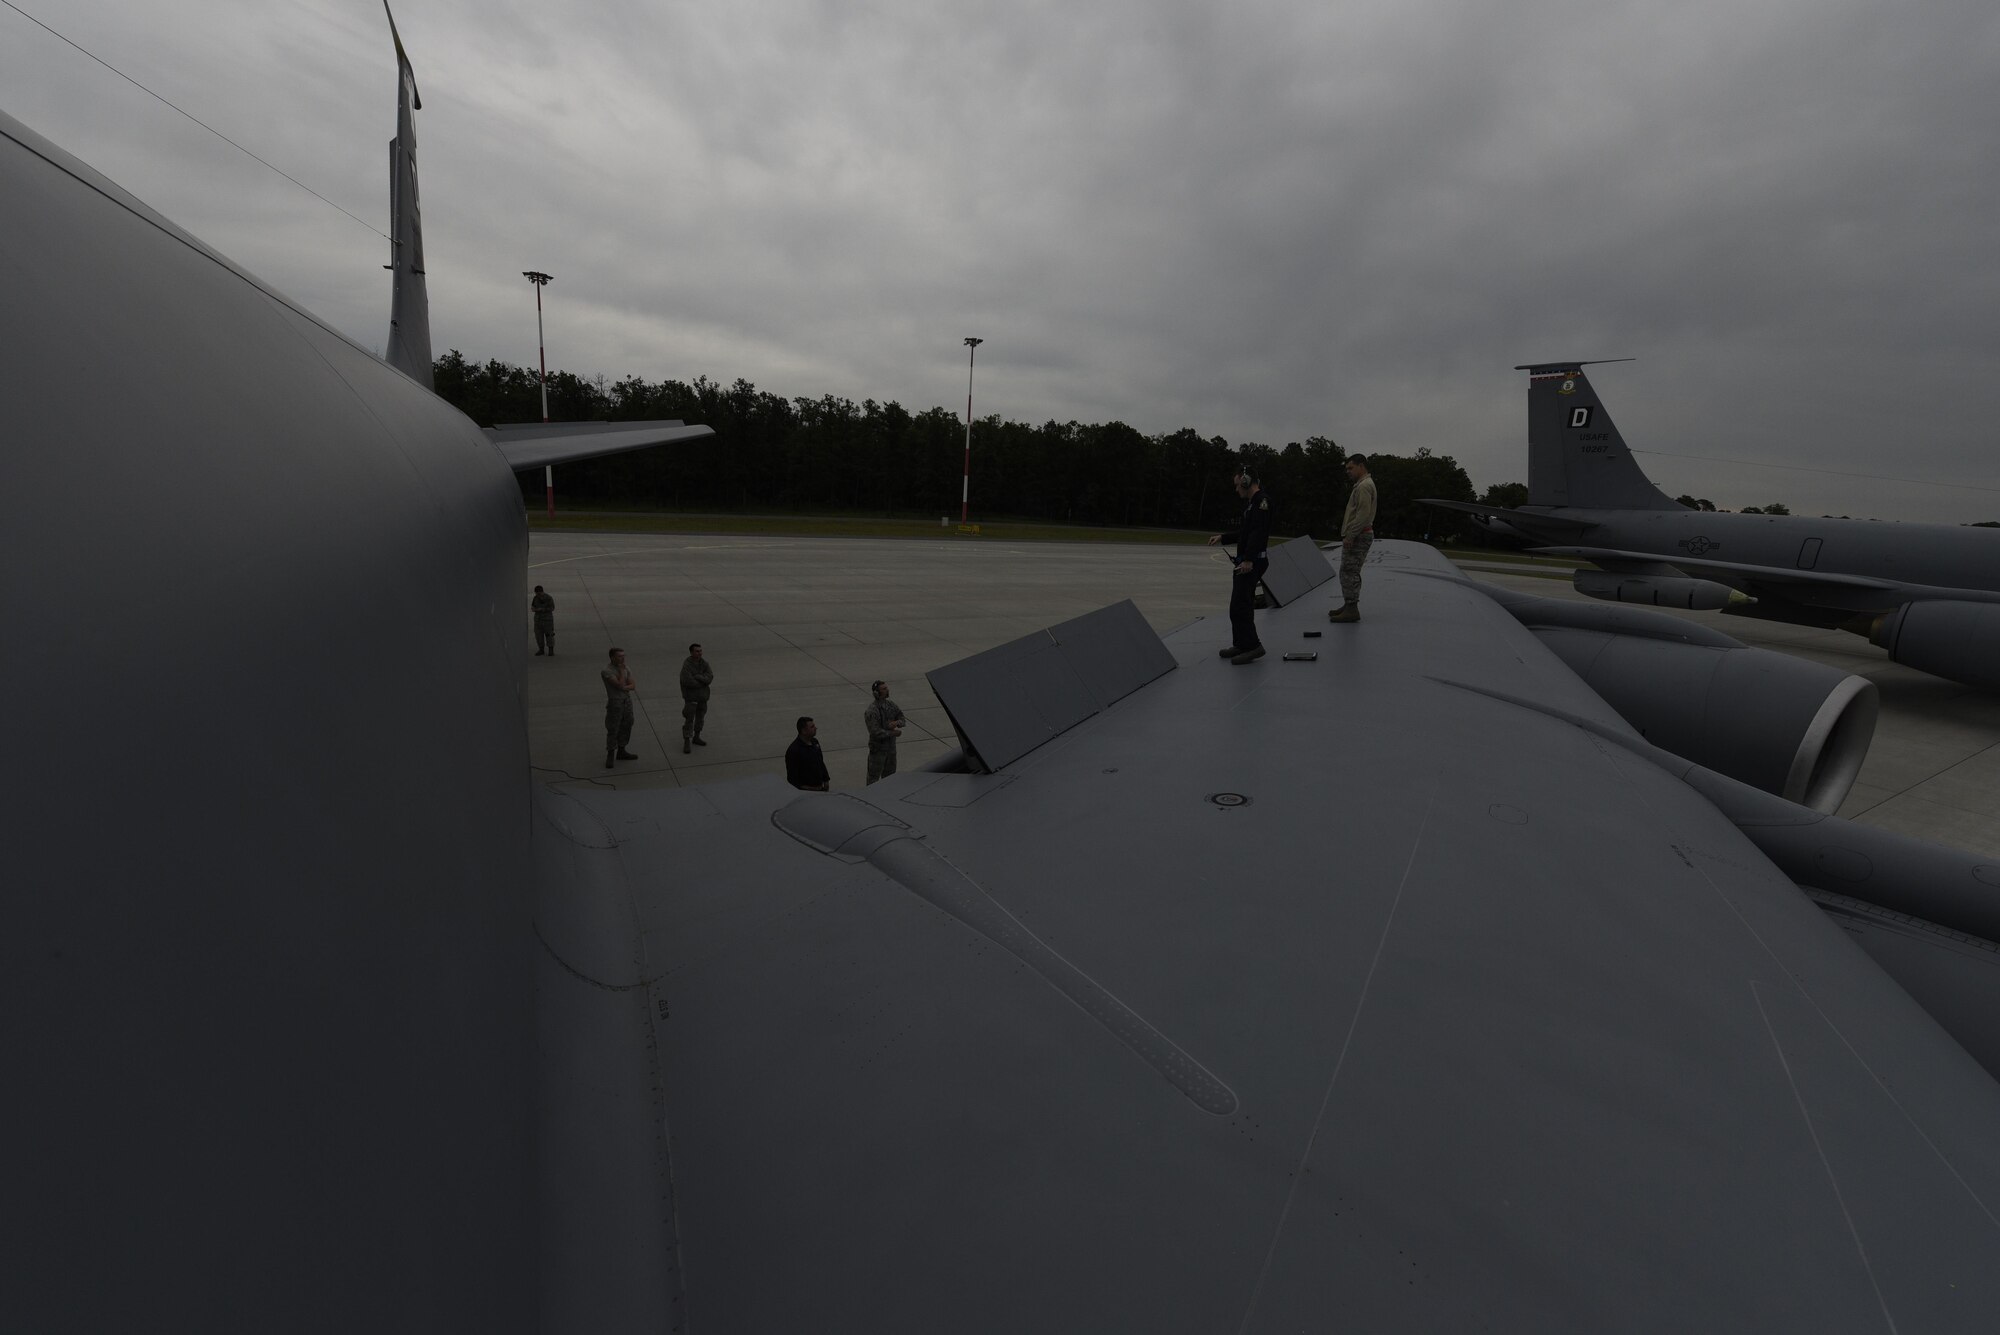 Airmen from the 100th Aircraft Maintenance Squadron inspect a KC-135R Stratotanker during BALTOPS exercise at
Powidz Air Base, Poland, June 6, 2017. BALTOPS is an annually recurring multinational exercise designed to
enhance flexibility and interoperability, as well as demonstrate resolve of allied and partner forces to defend the Baltic region. Participating nations include Belgium, Denmark, Estonia, Finland, France, Germany, Latvia, Lithuania, the Netherlands, Norway, Poland, Sweden, the United Kingdom, and the United States. (U.S. Air Force photo by Staff Sgt. Jonathan Snyder)